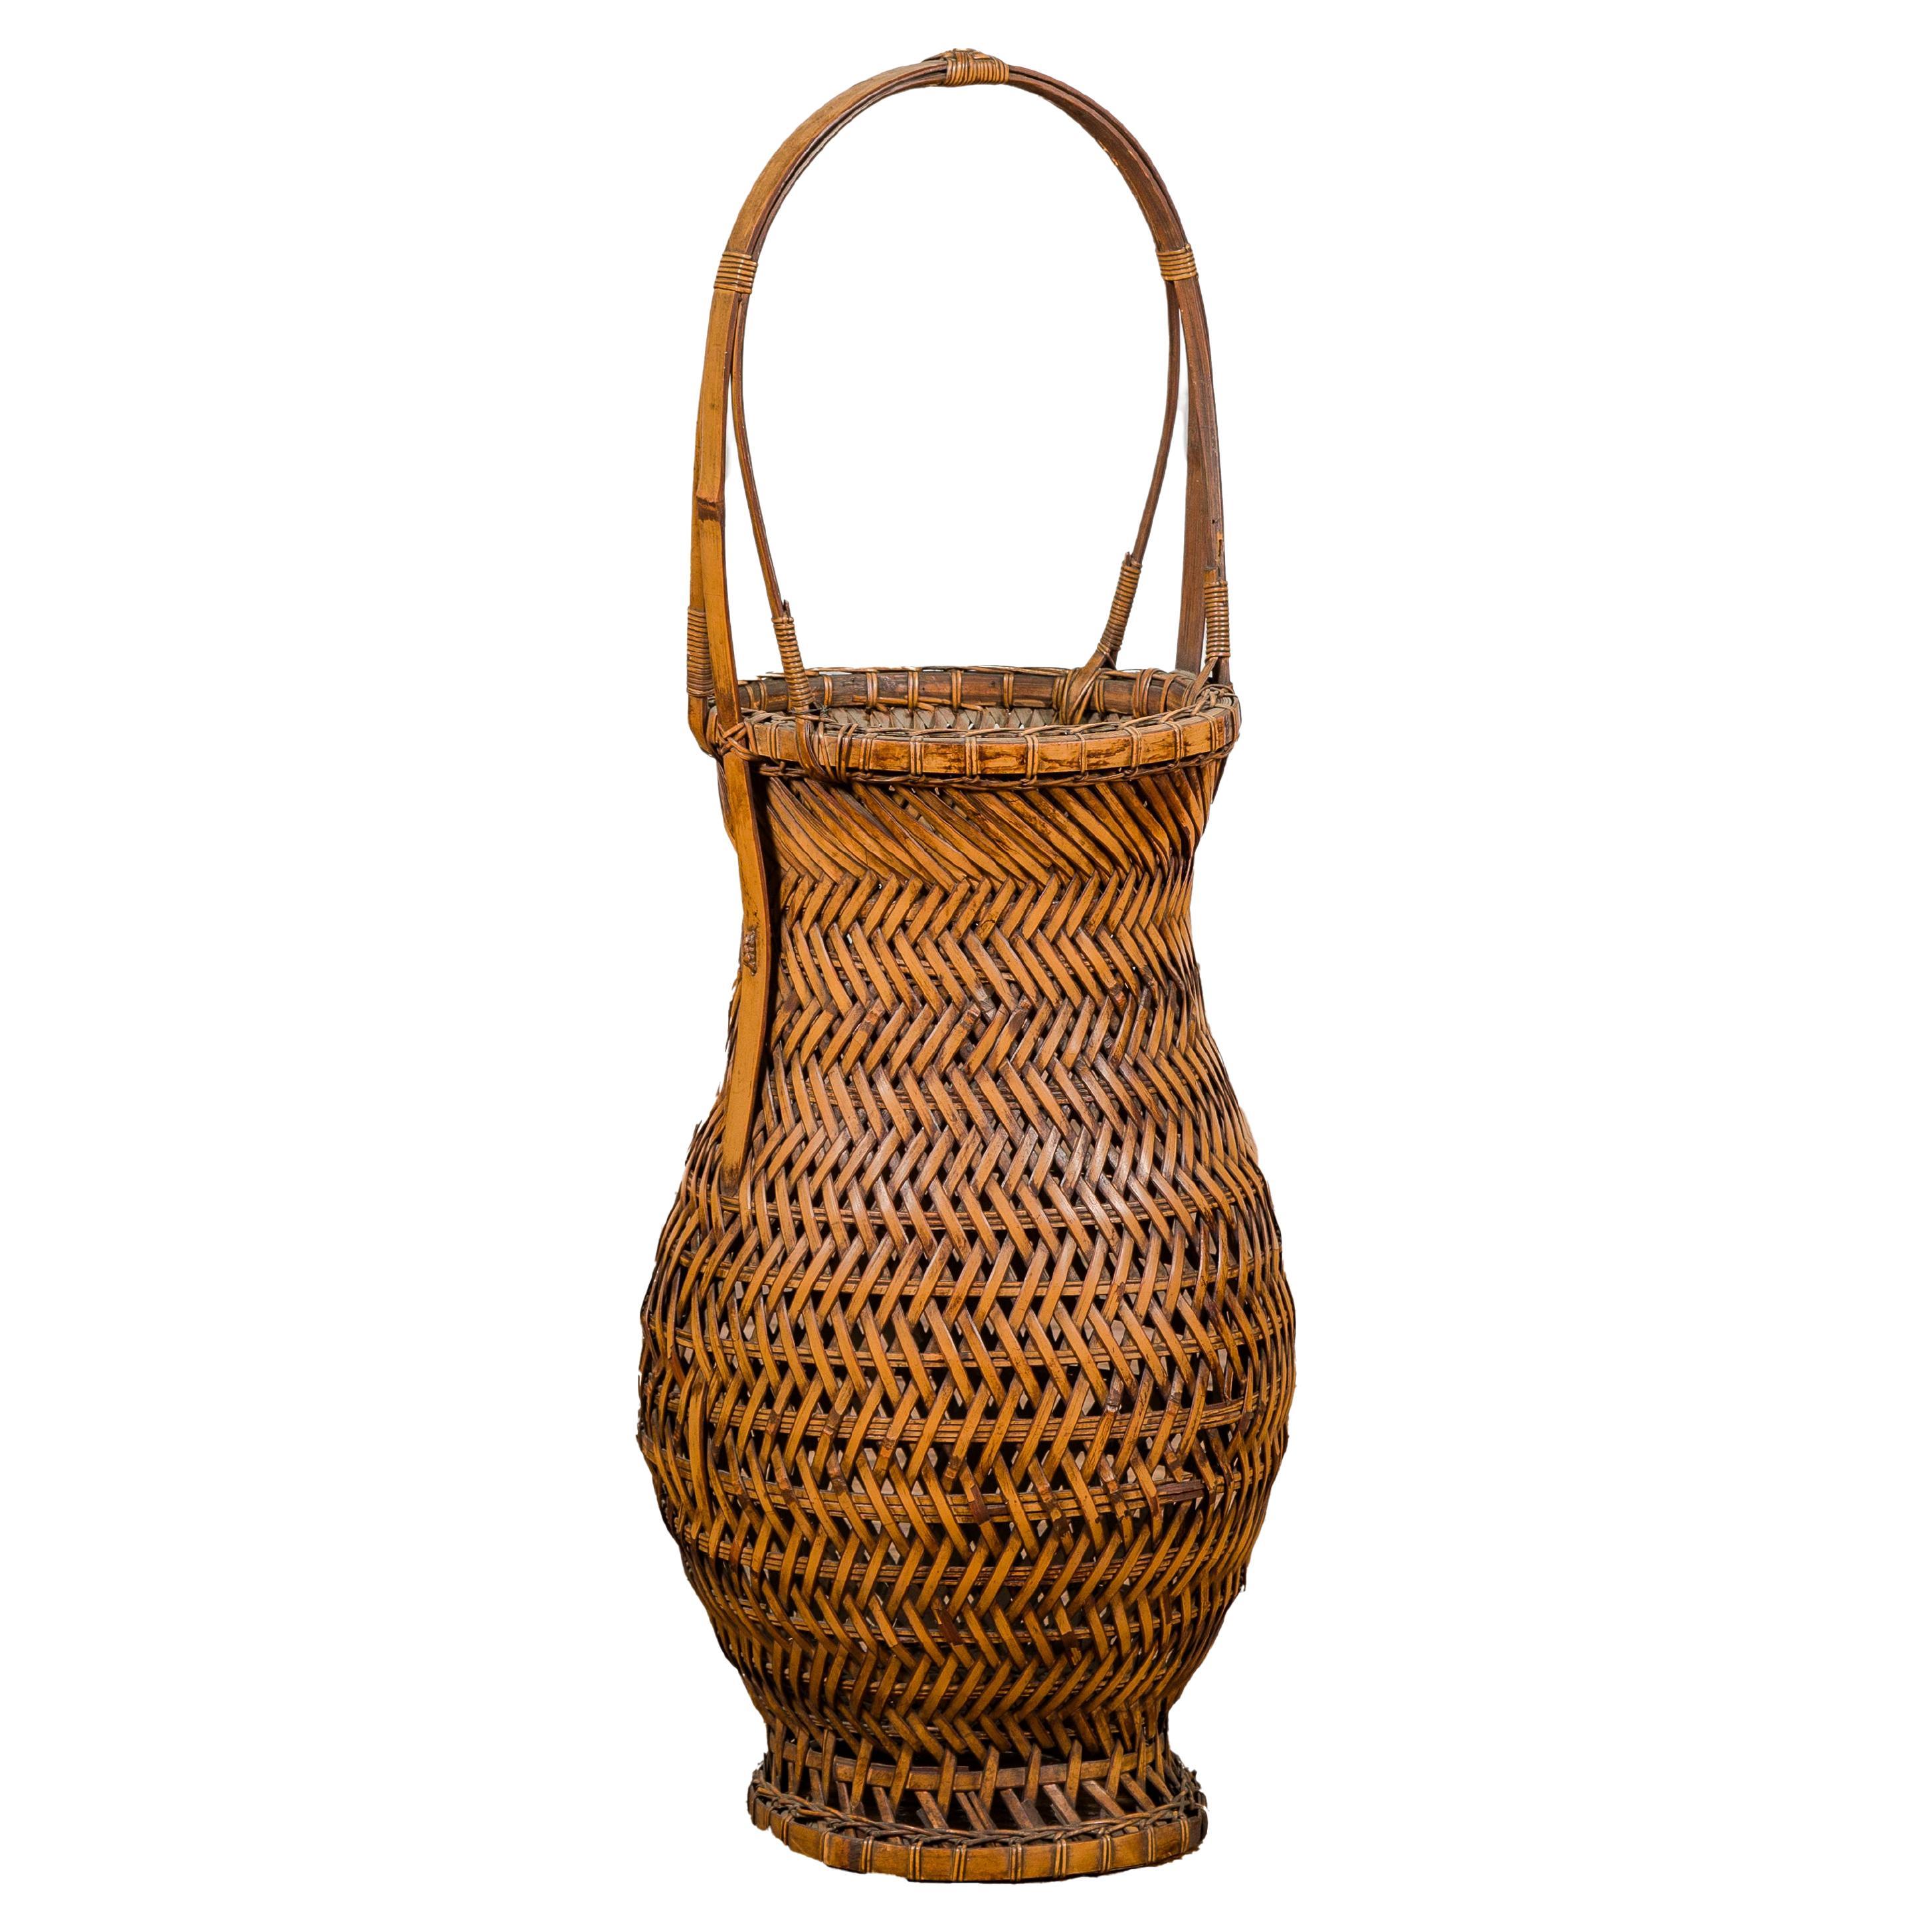 Antique Japanese Woven Bamboo Ikebana Basket with Large Handle, circa 1900 For Sale